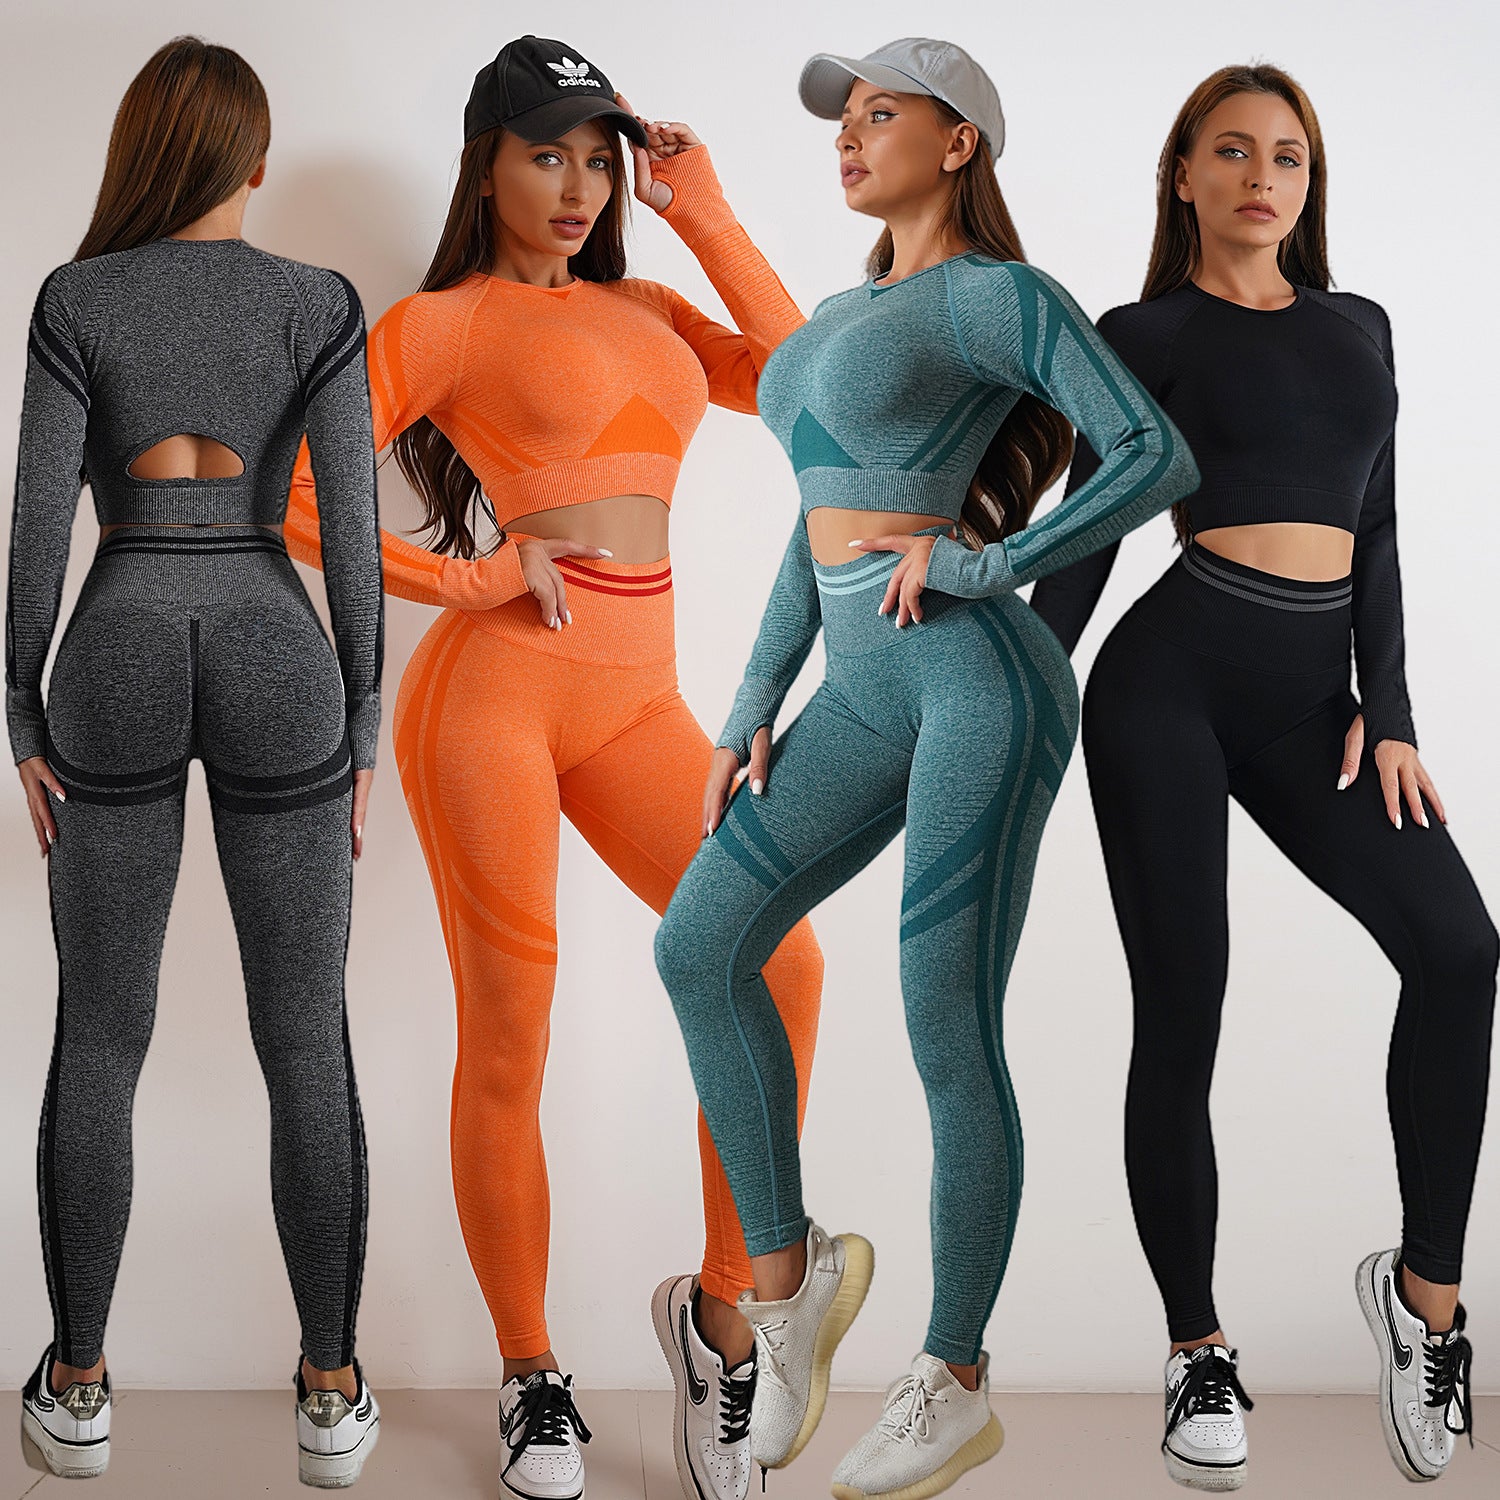 Lovemi -  Seamless Yoga Pants Sports Gym Fitness Leggings Or Long Sleeve Tops Outfits Butt Lifting Slim Workout Sportswear Clothing